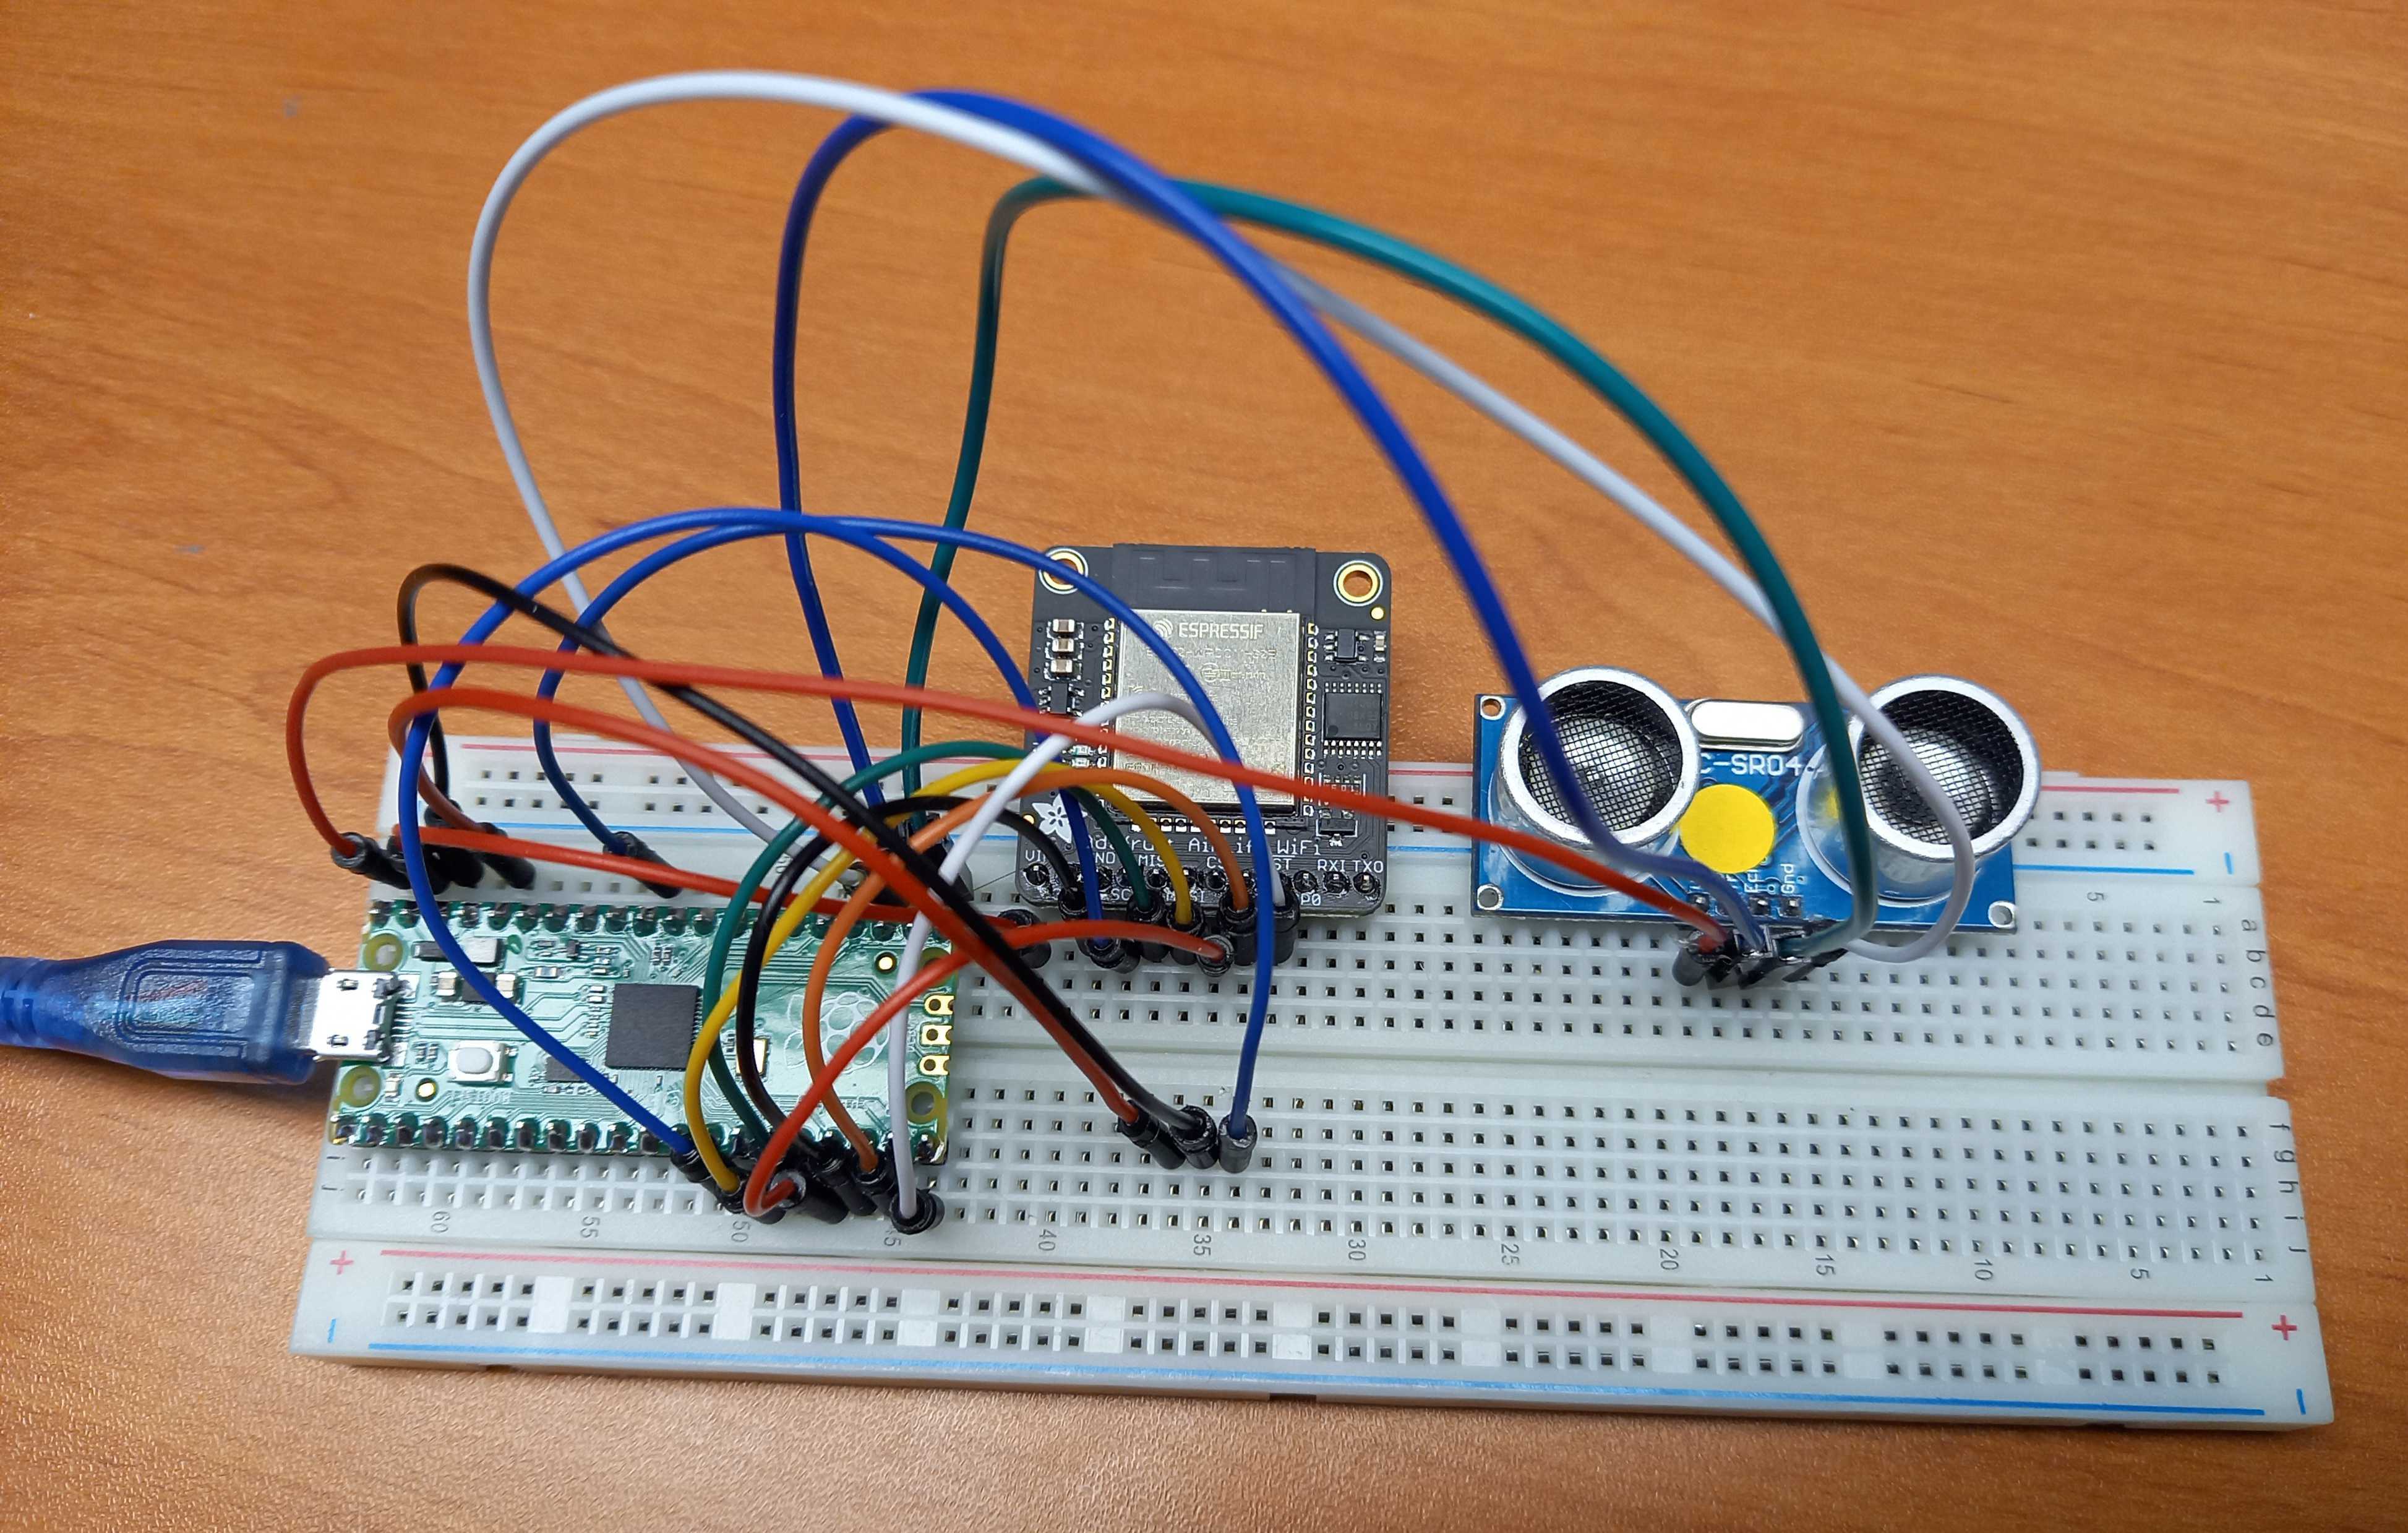 Breadboard wiring with Raspberry Pi Pico, Adafruit AirLift and distance sensor